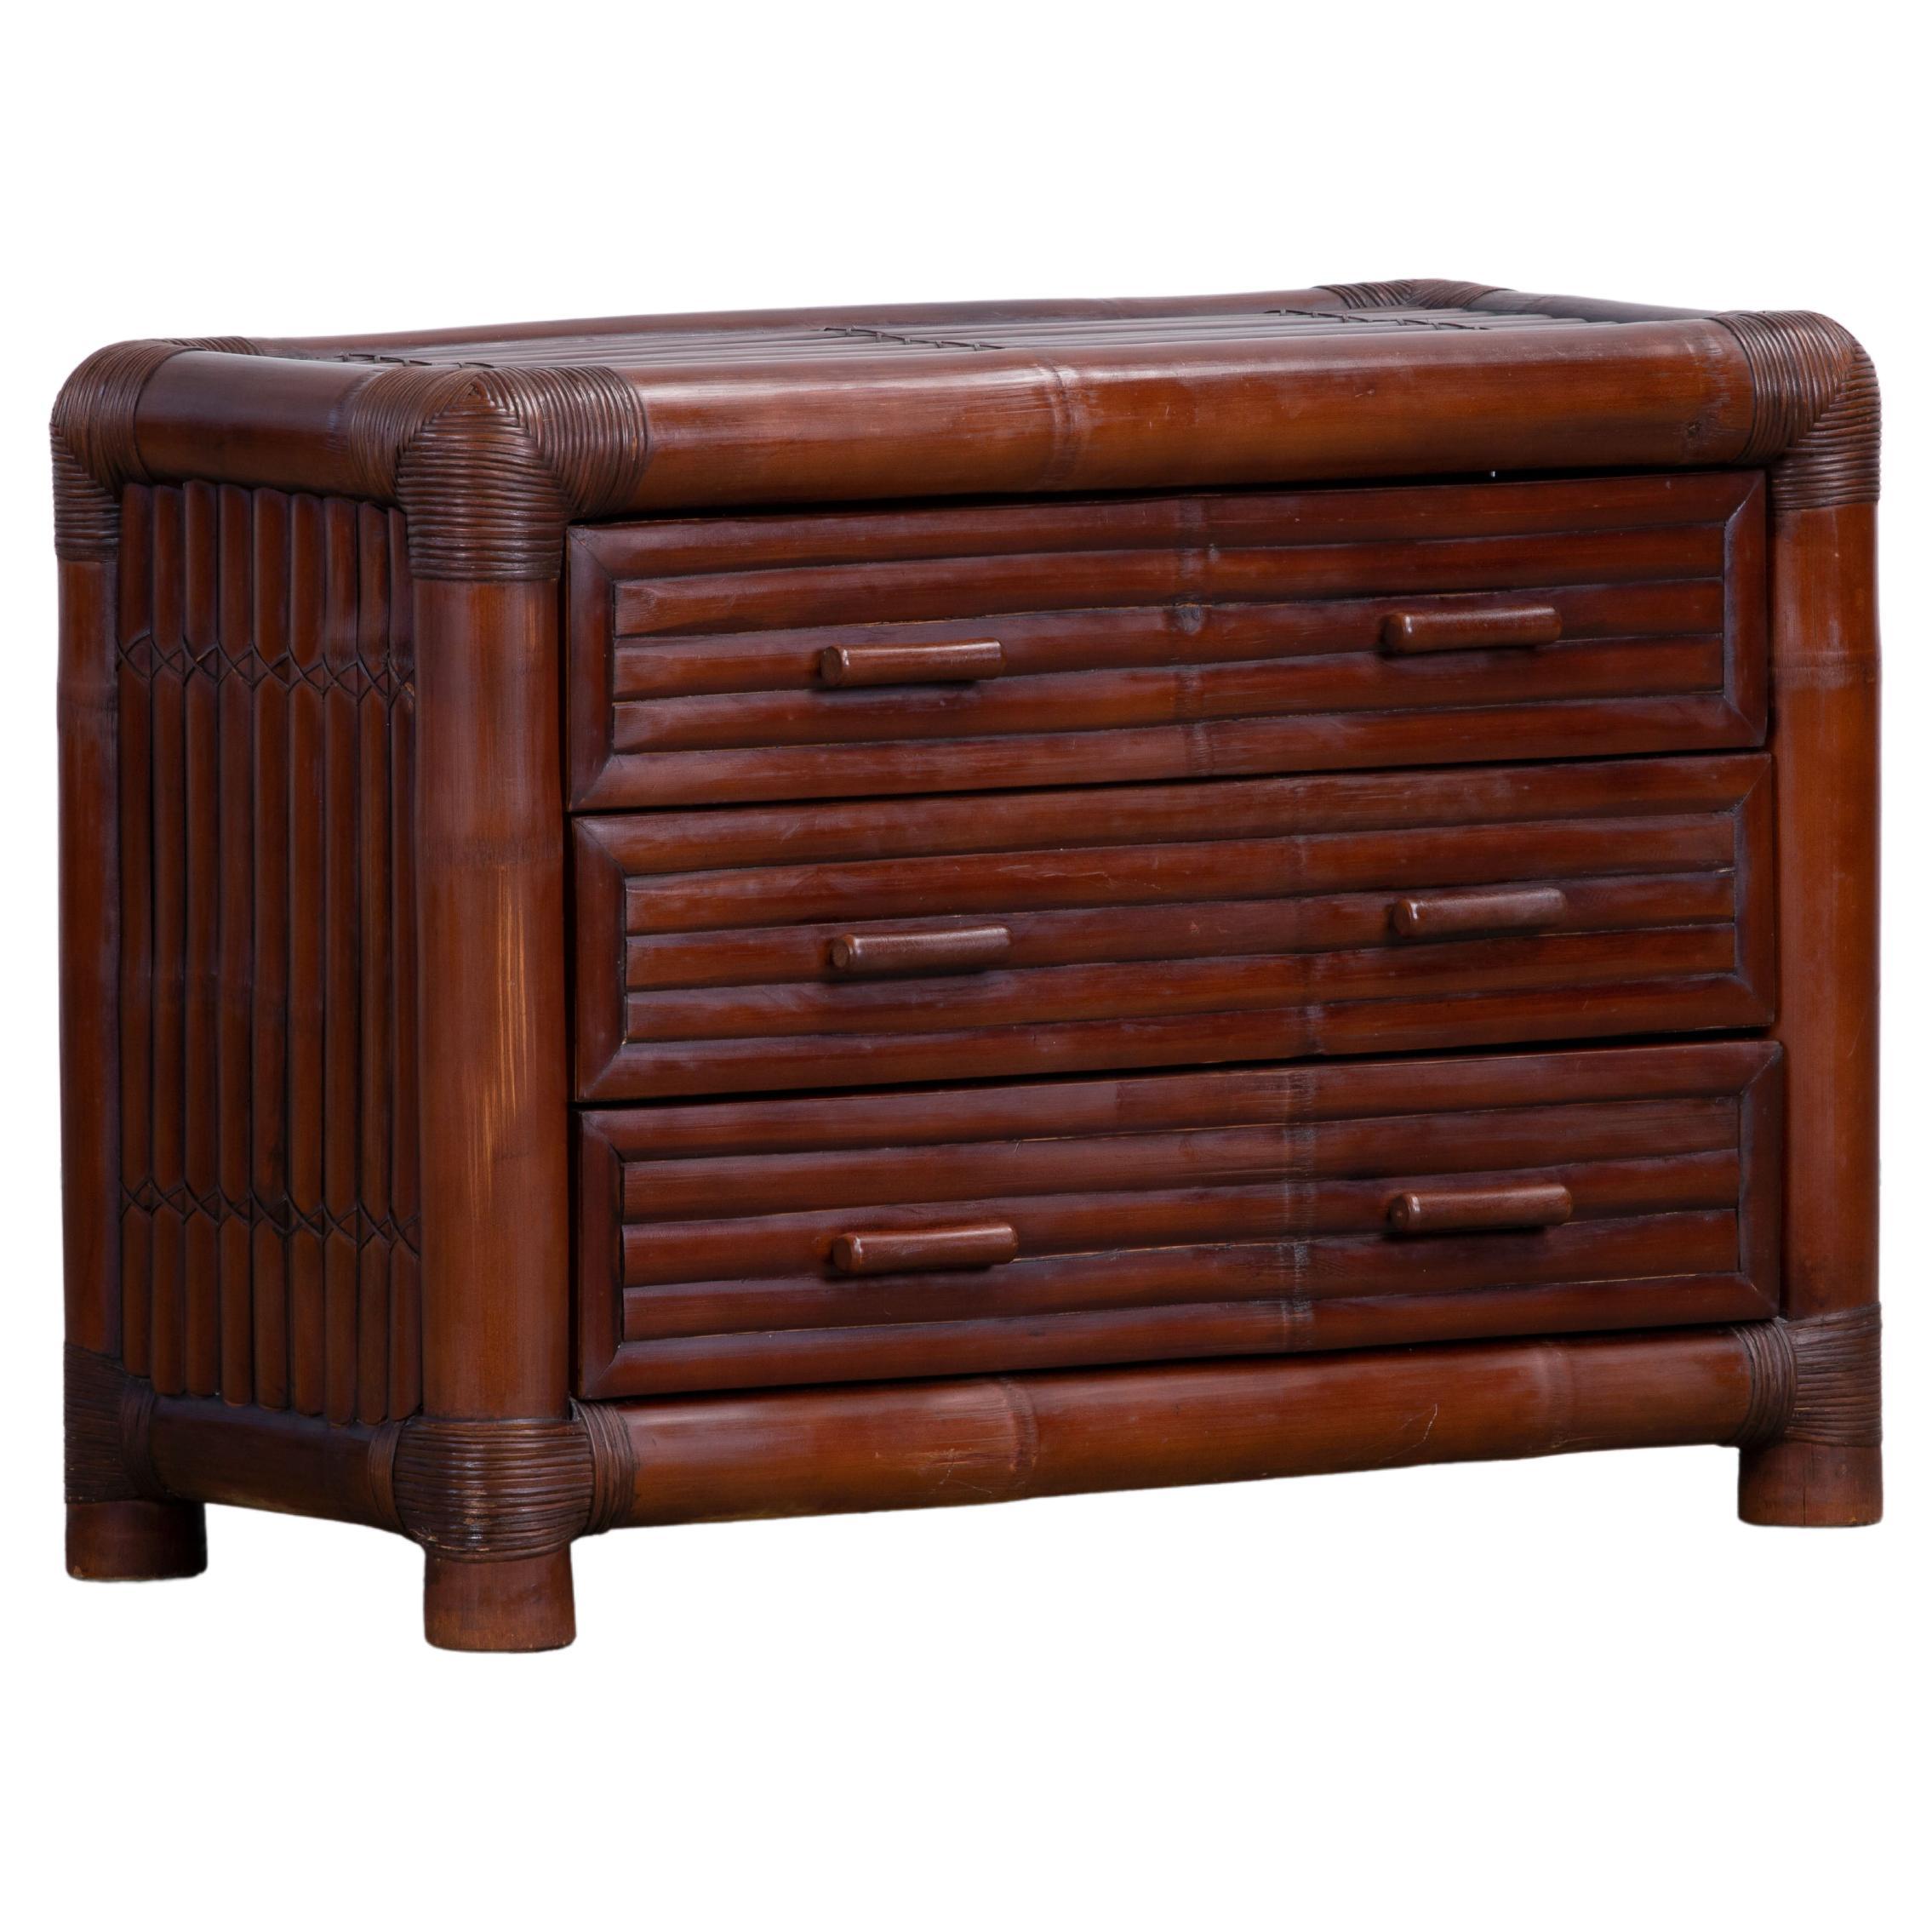 Italian Cane/Bamboo Organic Modern Chest of Drawers For Sale